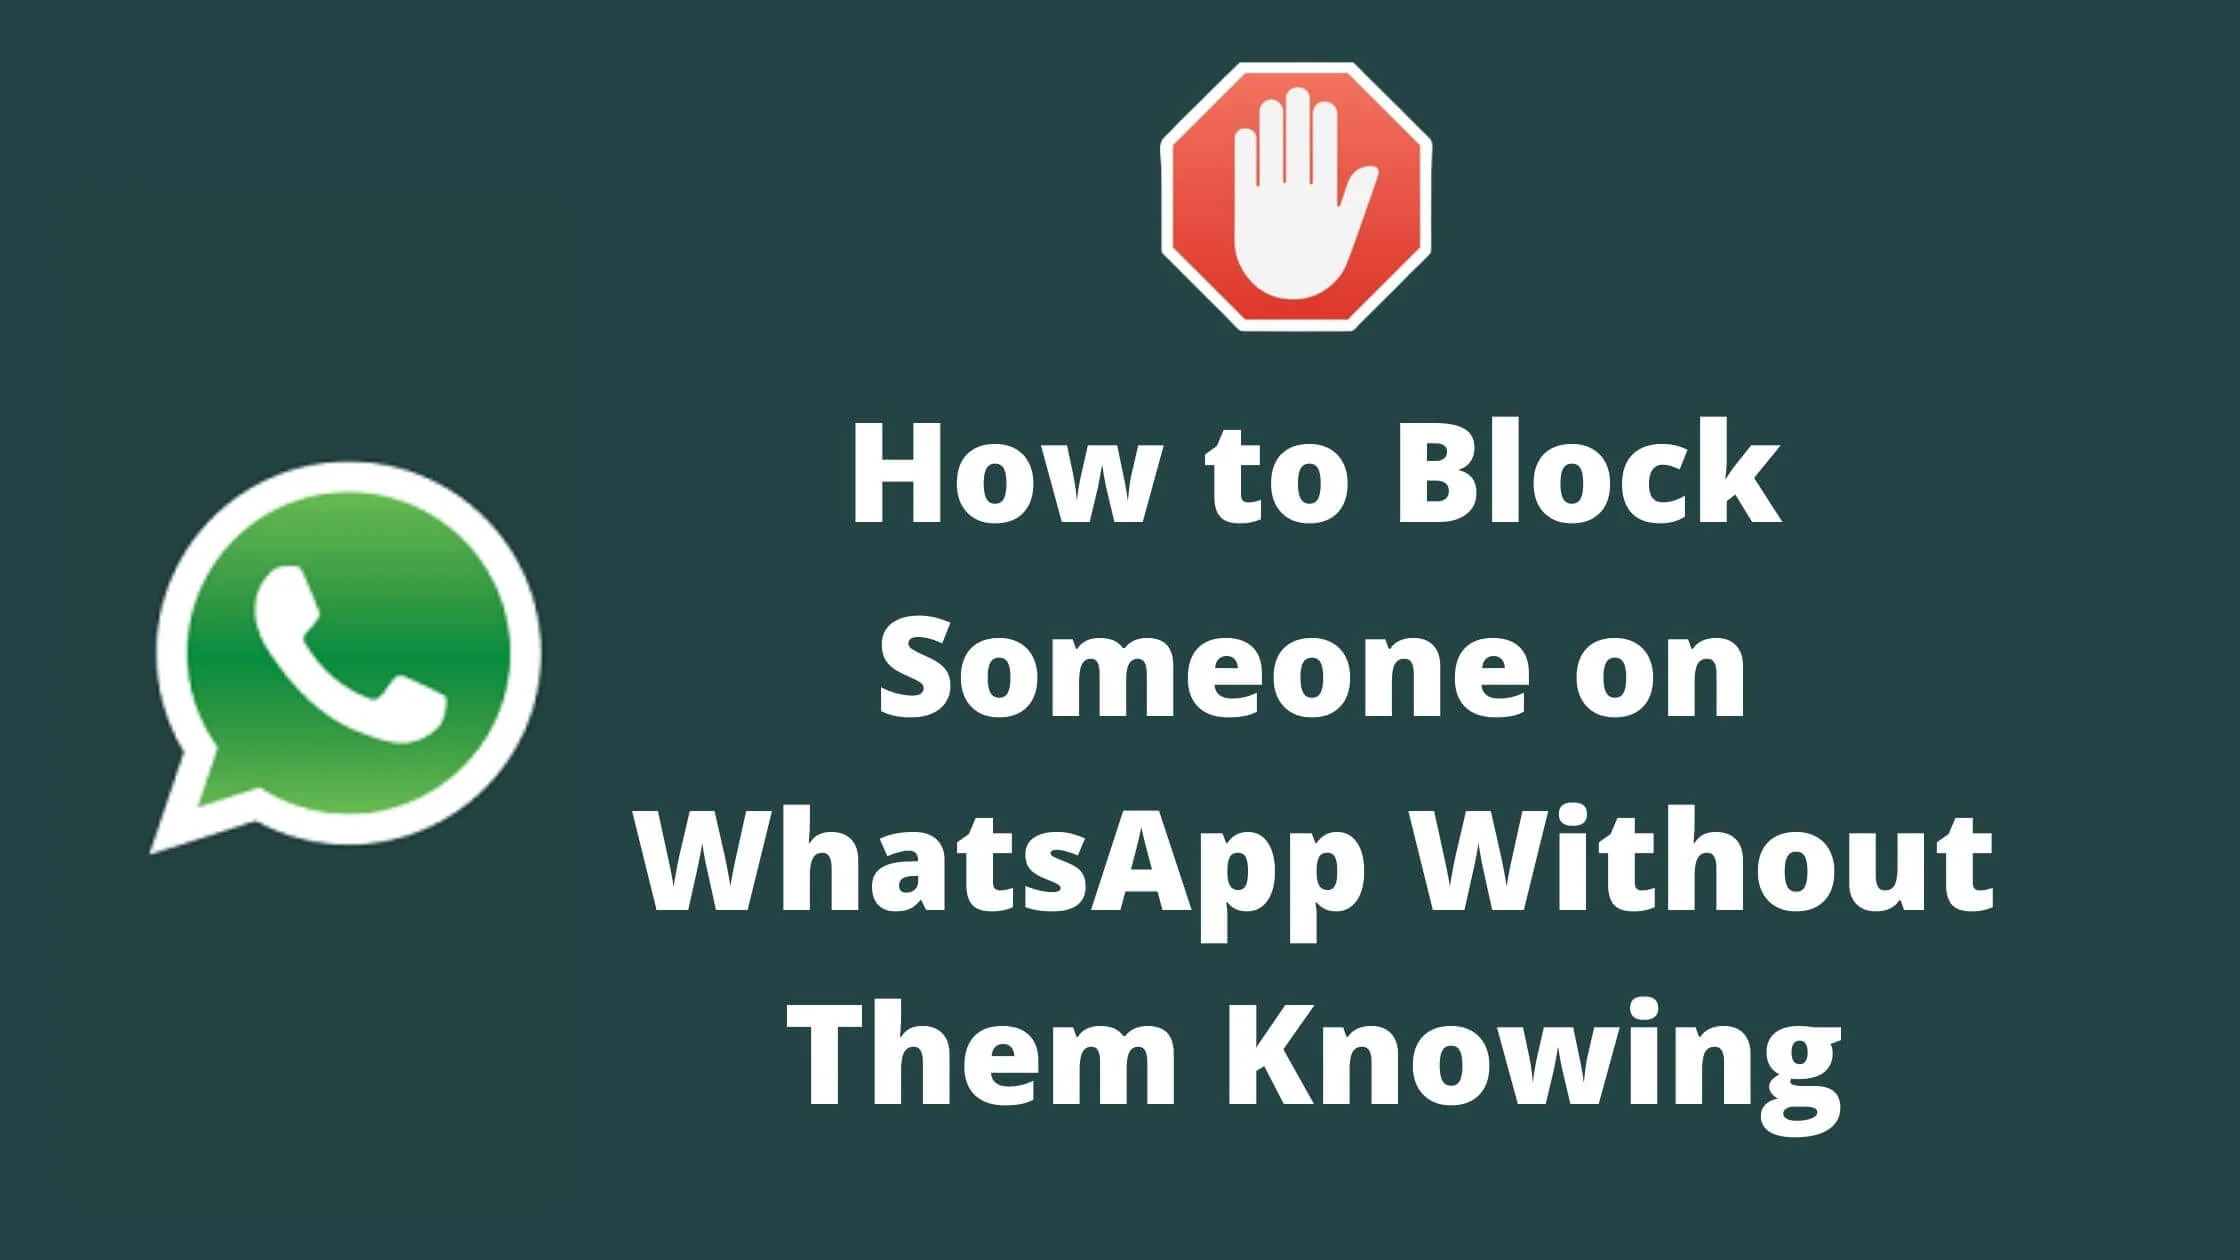 Block Someone on WhatsApp Without Them Knowing